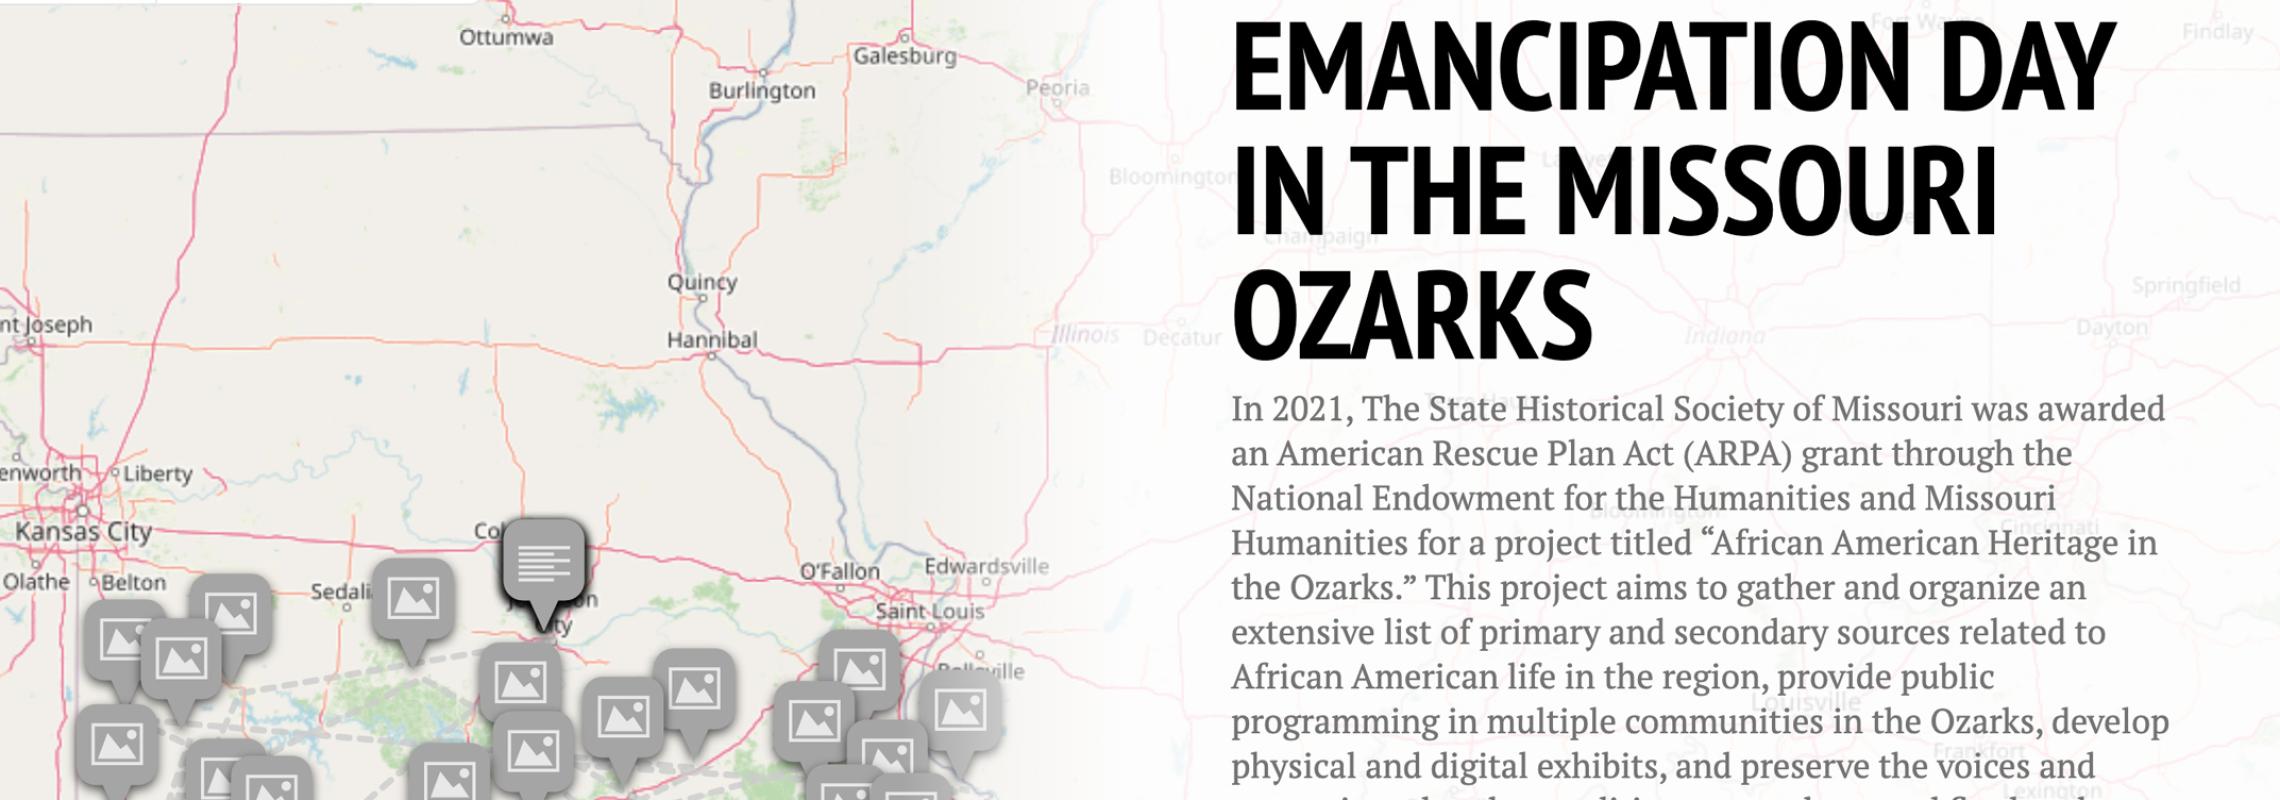 First slide of the Emancipation Day in Missouri Ozarks digital interactive map